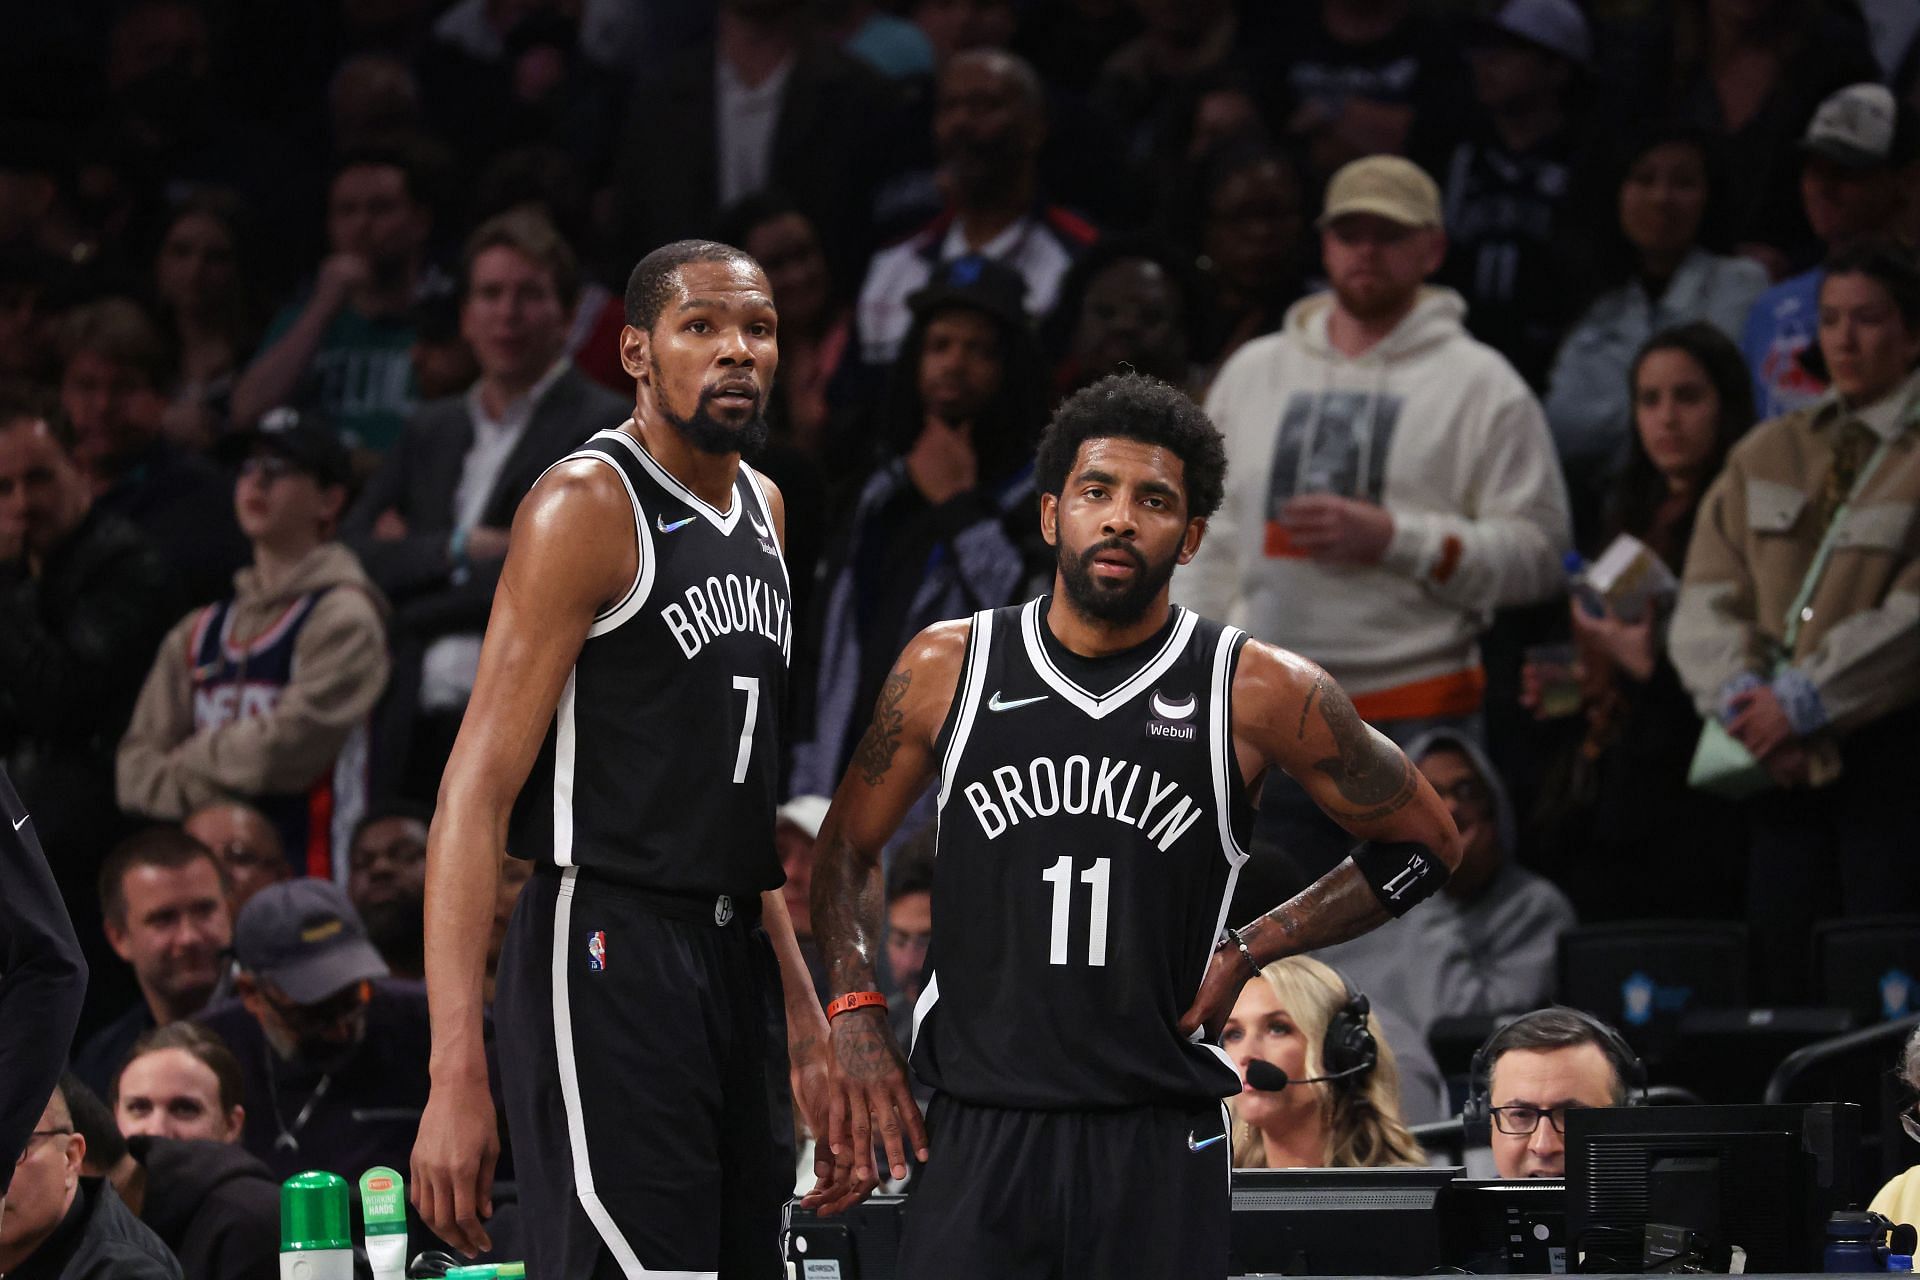 Kevin Durant #7 and Kyrie Irving #11 of the Brooklyn Nets